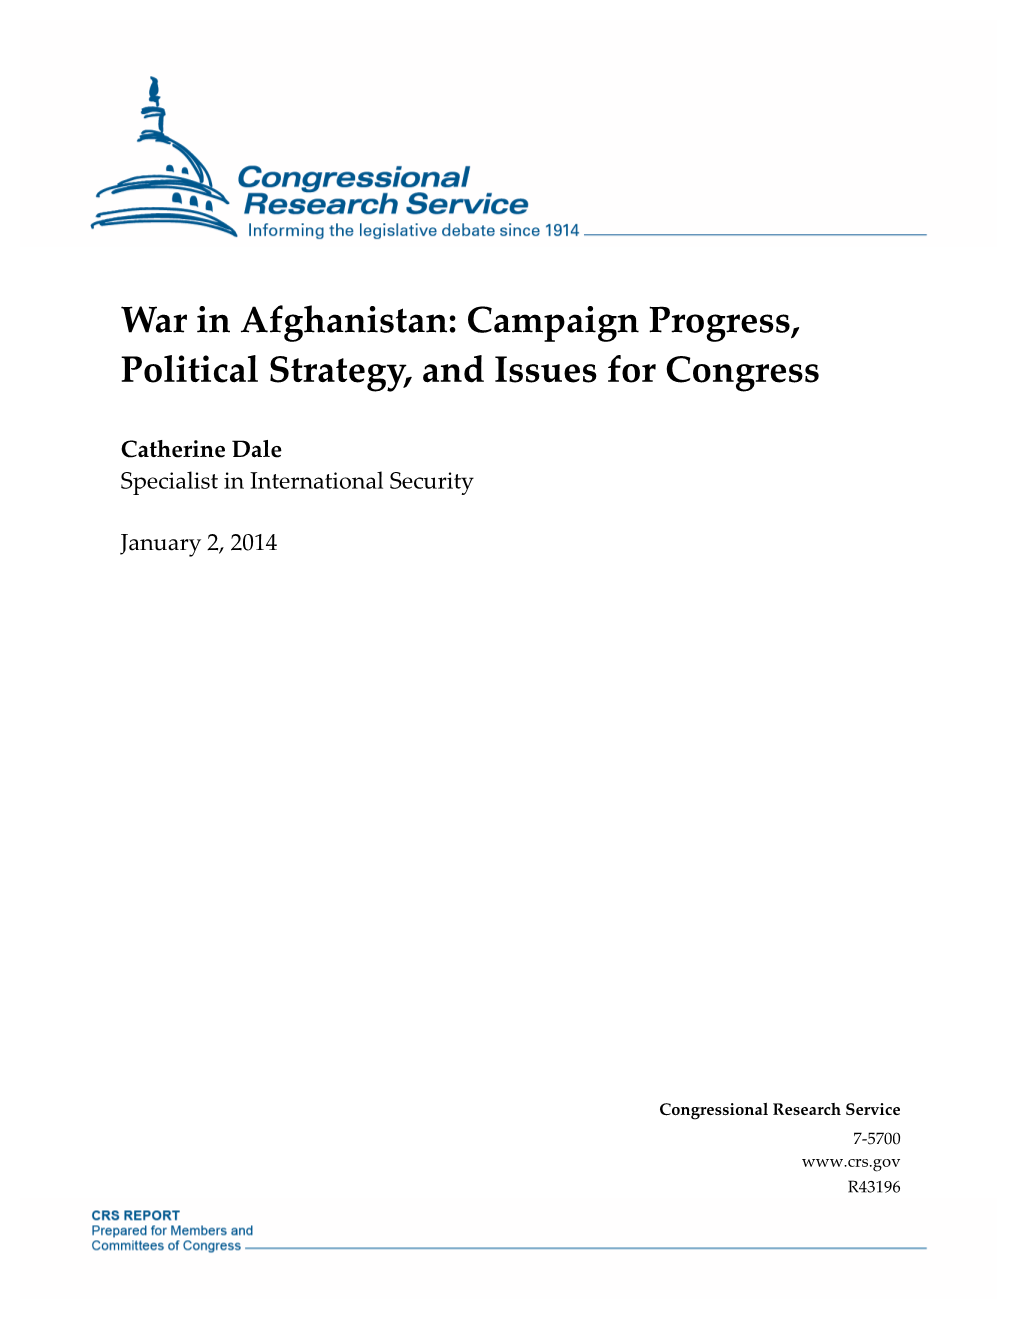 War in Afghanistan: Campaign Progress, Political Strategy, and Issues for Congress